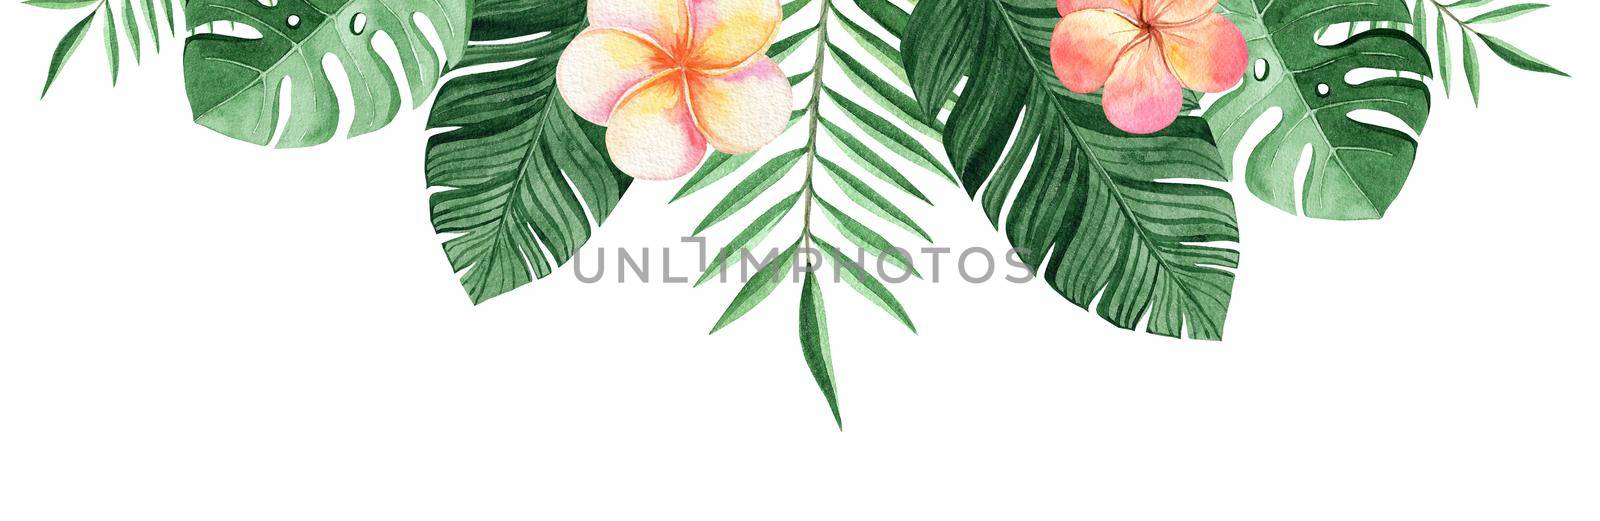 Watercolor tropical flowers border isolated on white background by dreamloud